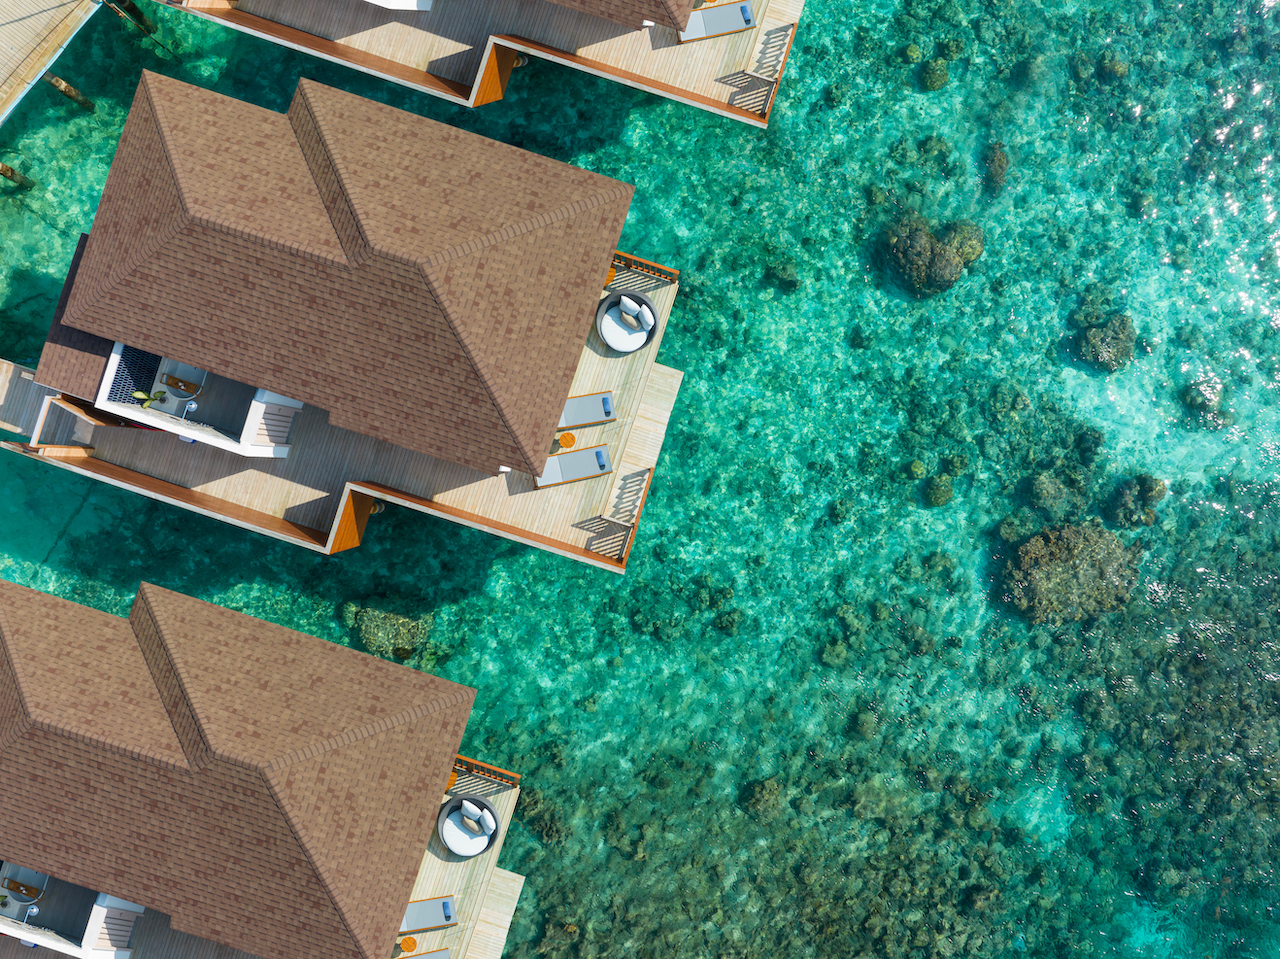 Located in the Baa Atoll, Avani+ Fares Maldives Resort welcomes guests to a natural island paradise.